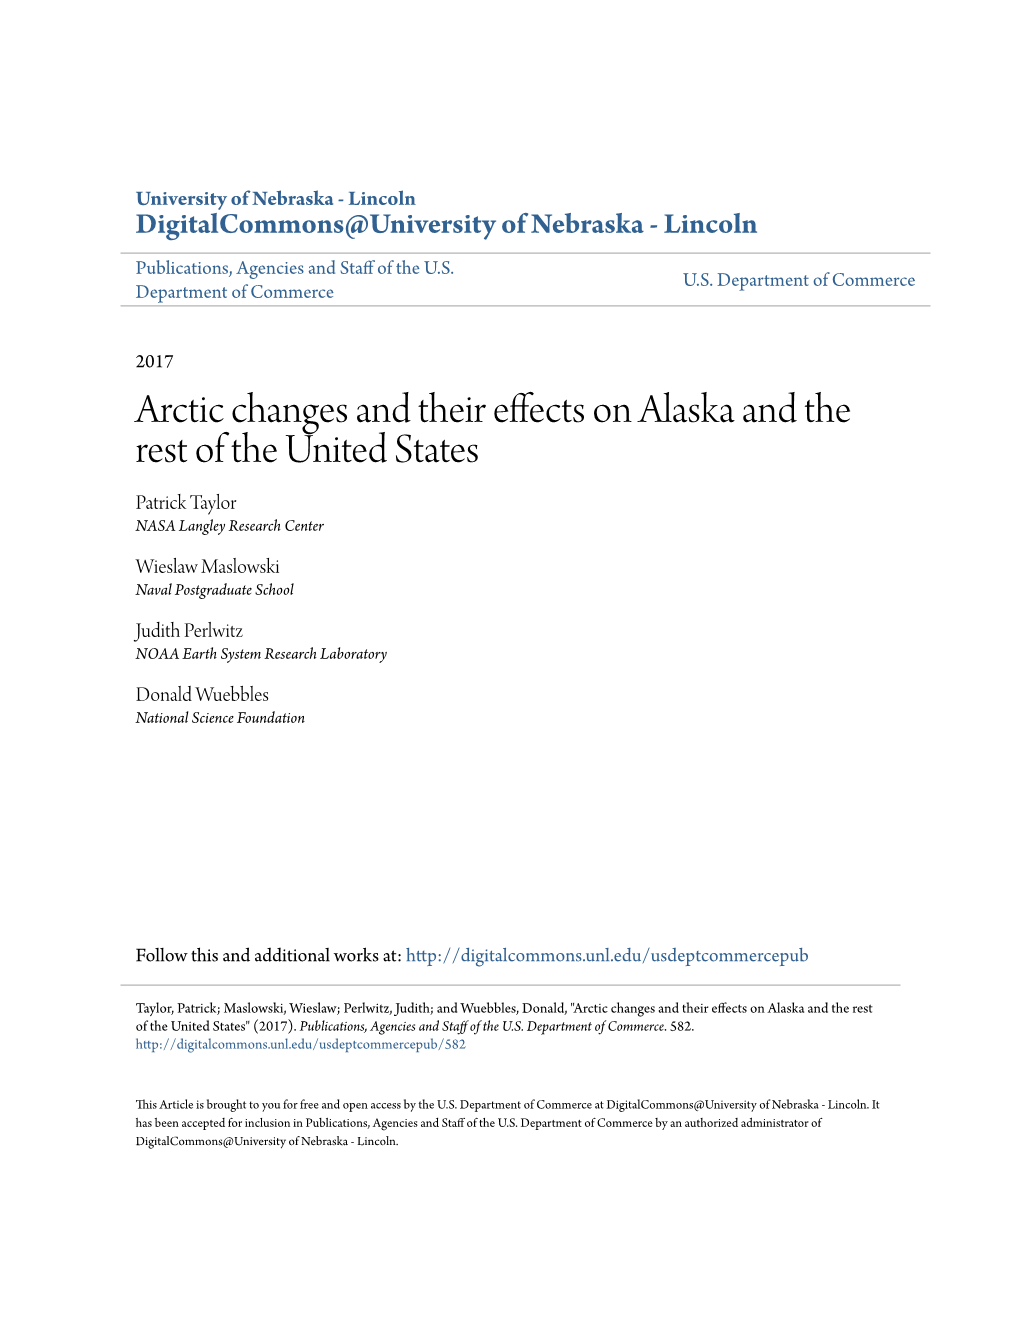 Arctic Changes and Their Effects on Alaska and the Rest of the United States Patrick Taylor NASA Langley Research Center